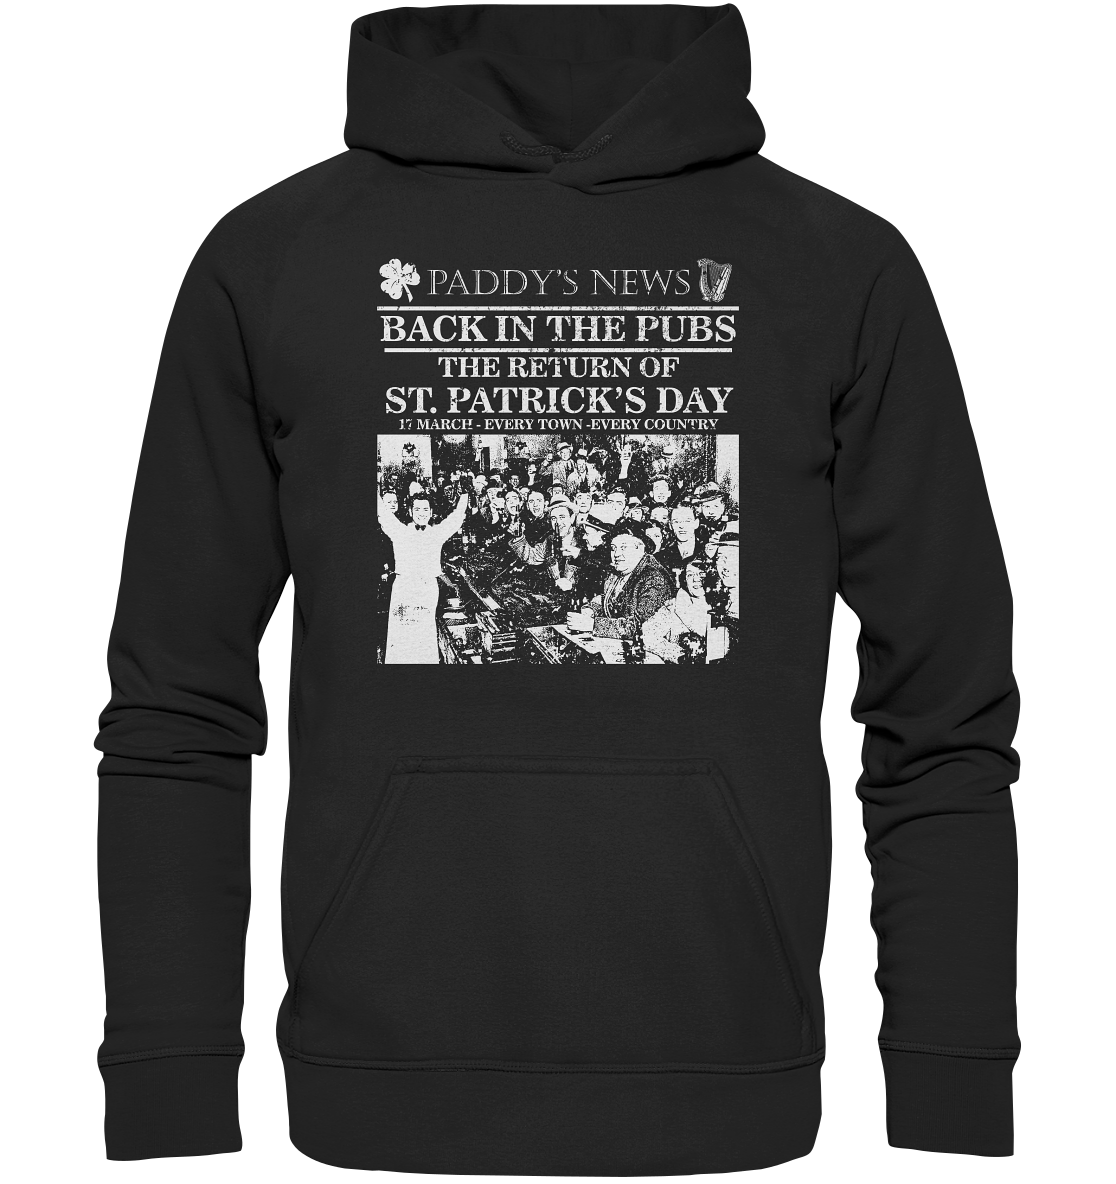 Back In The Pubs "The Return Of St. Patrick's Day" - Basic Unisex Hoodie